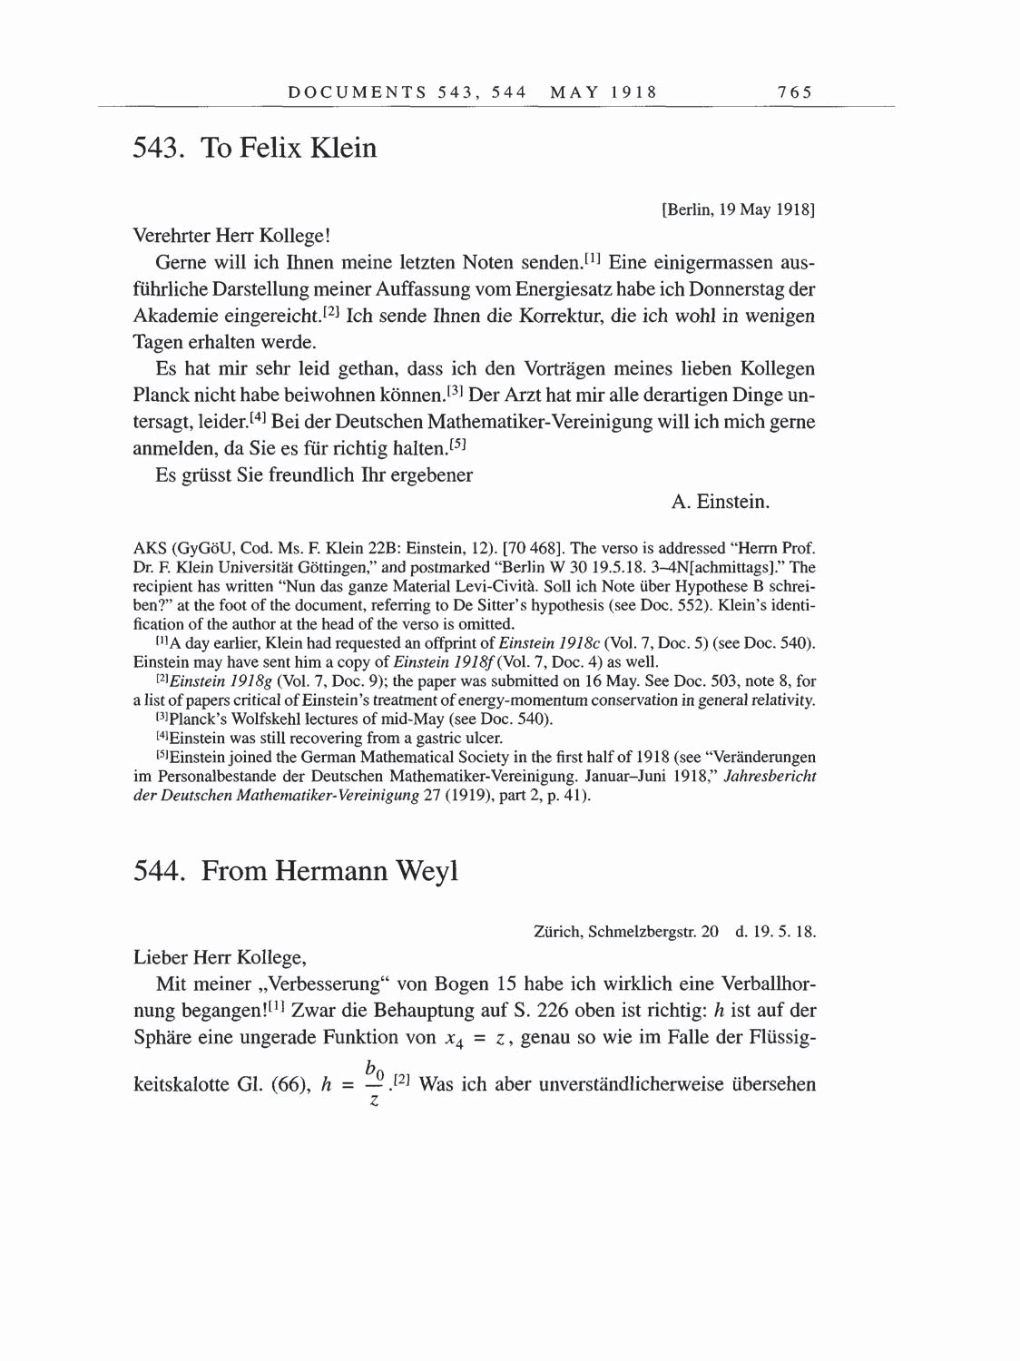 Volume 8, Part B: The Berlin Years: Correspondence 1918 page 765